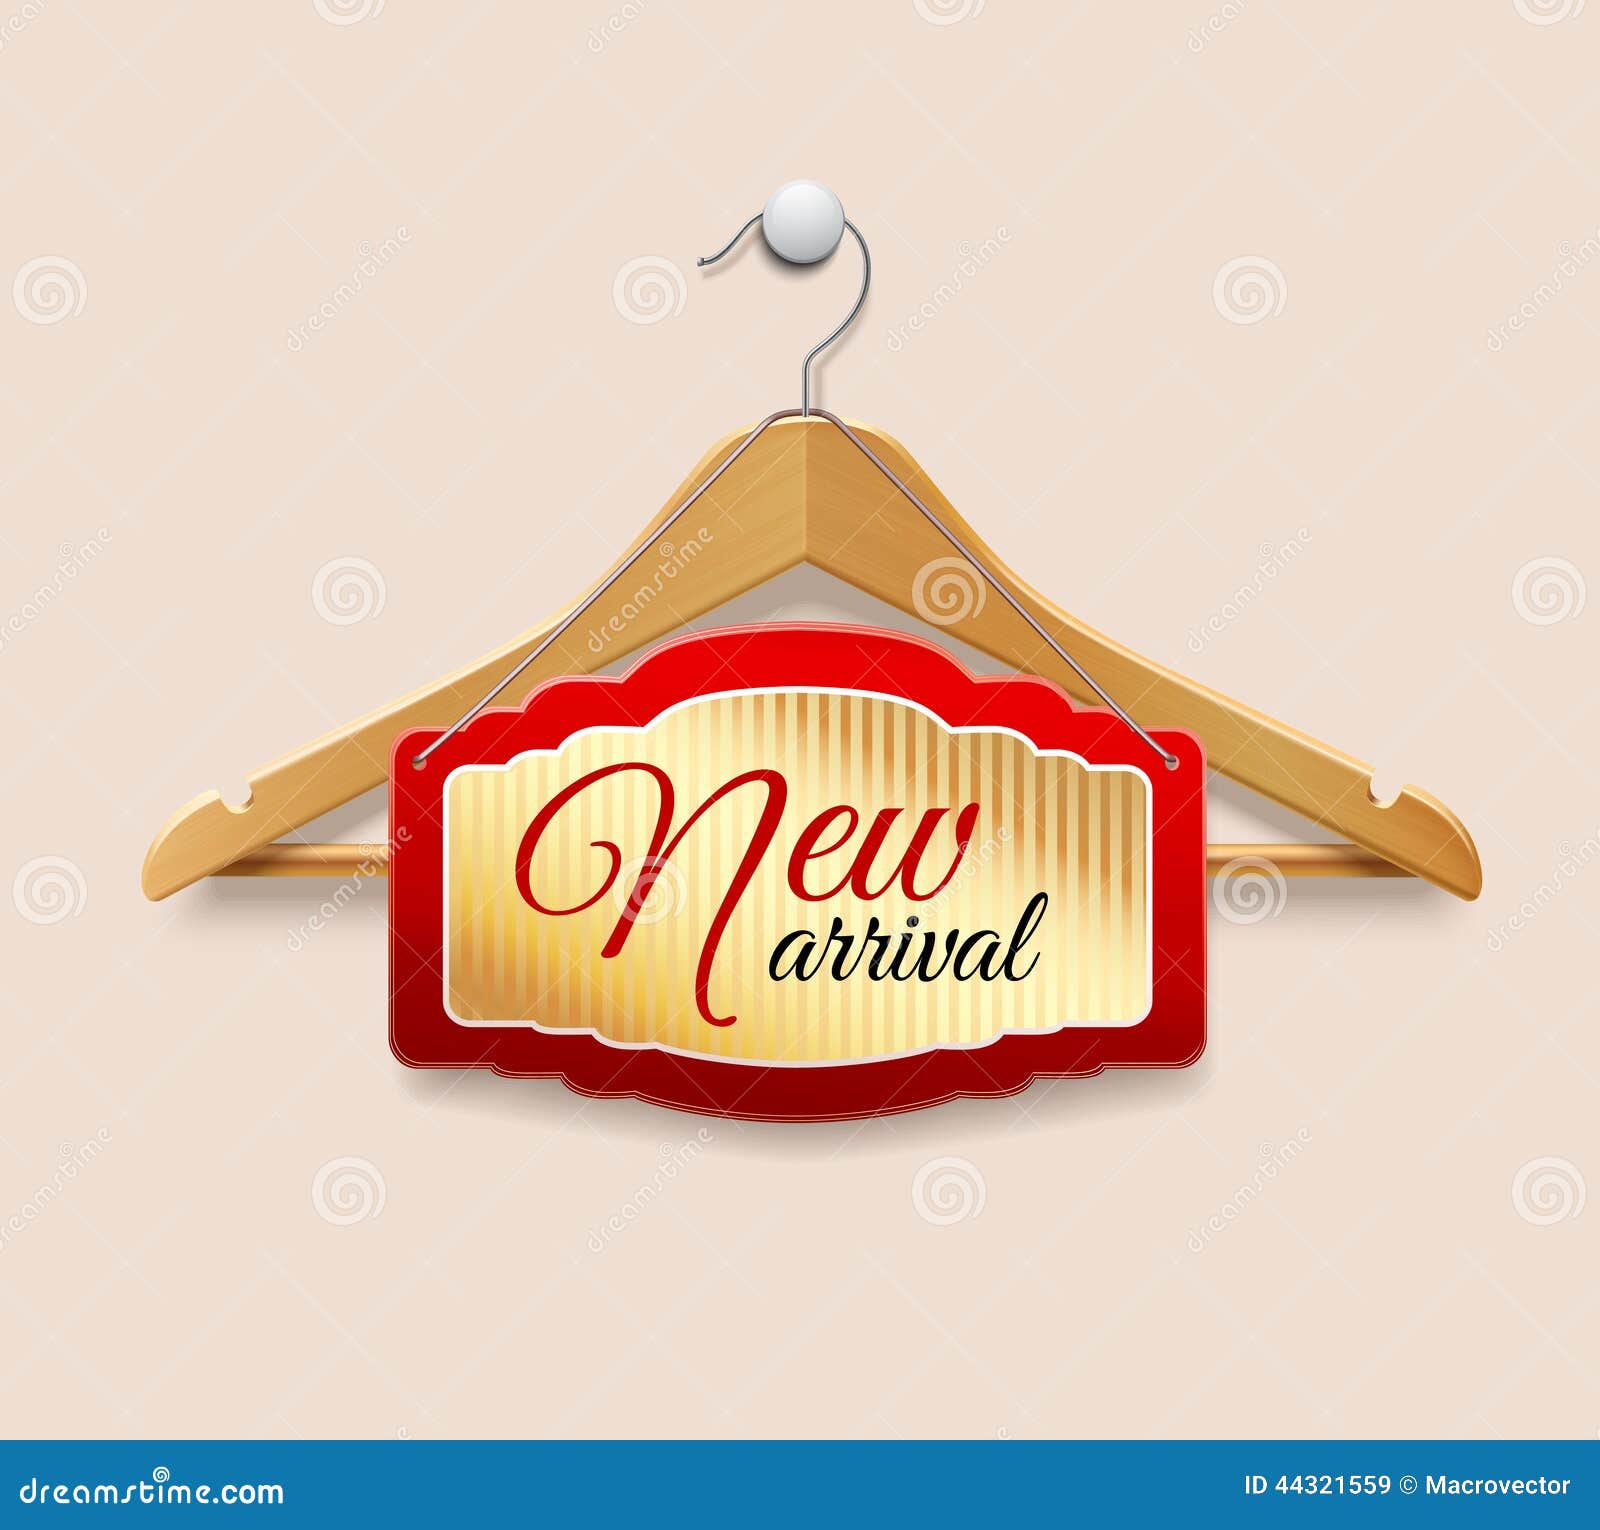  Clothes  Hanger  Label New Arrival Stock Vector  Image 